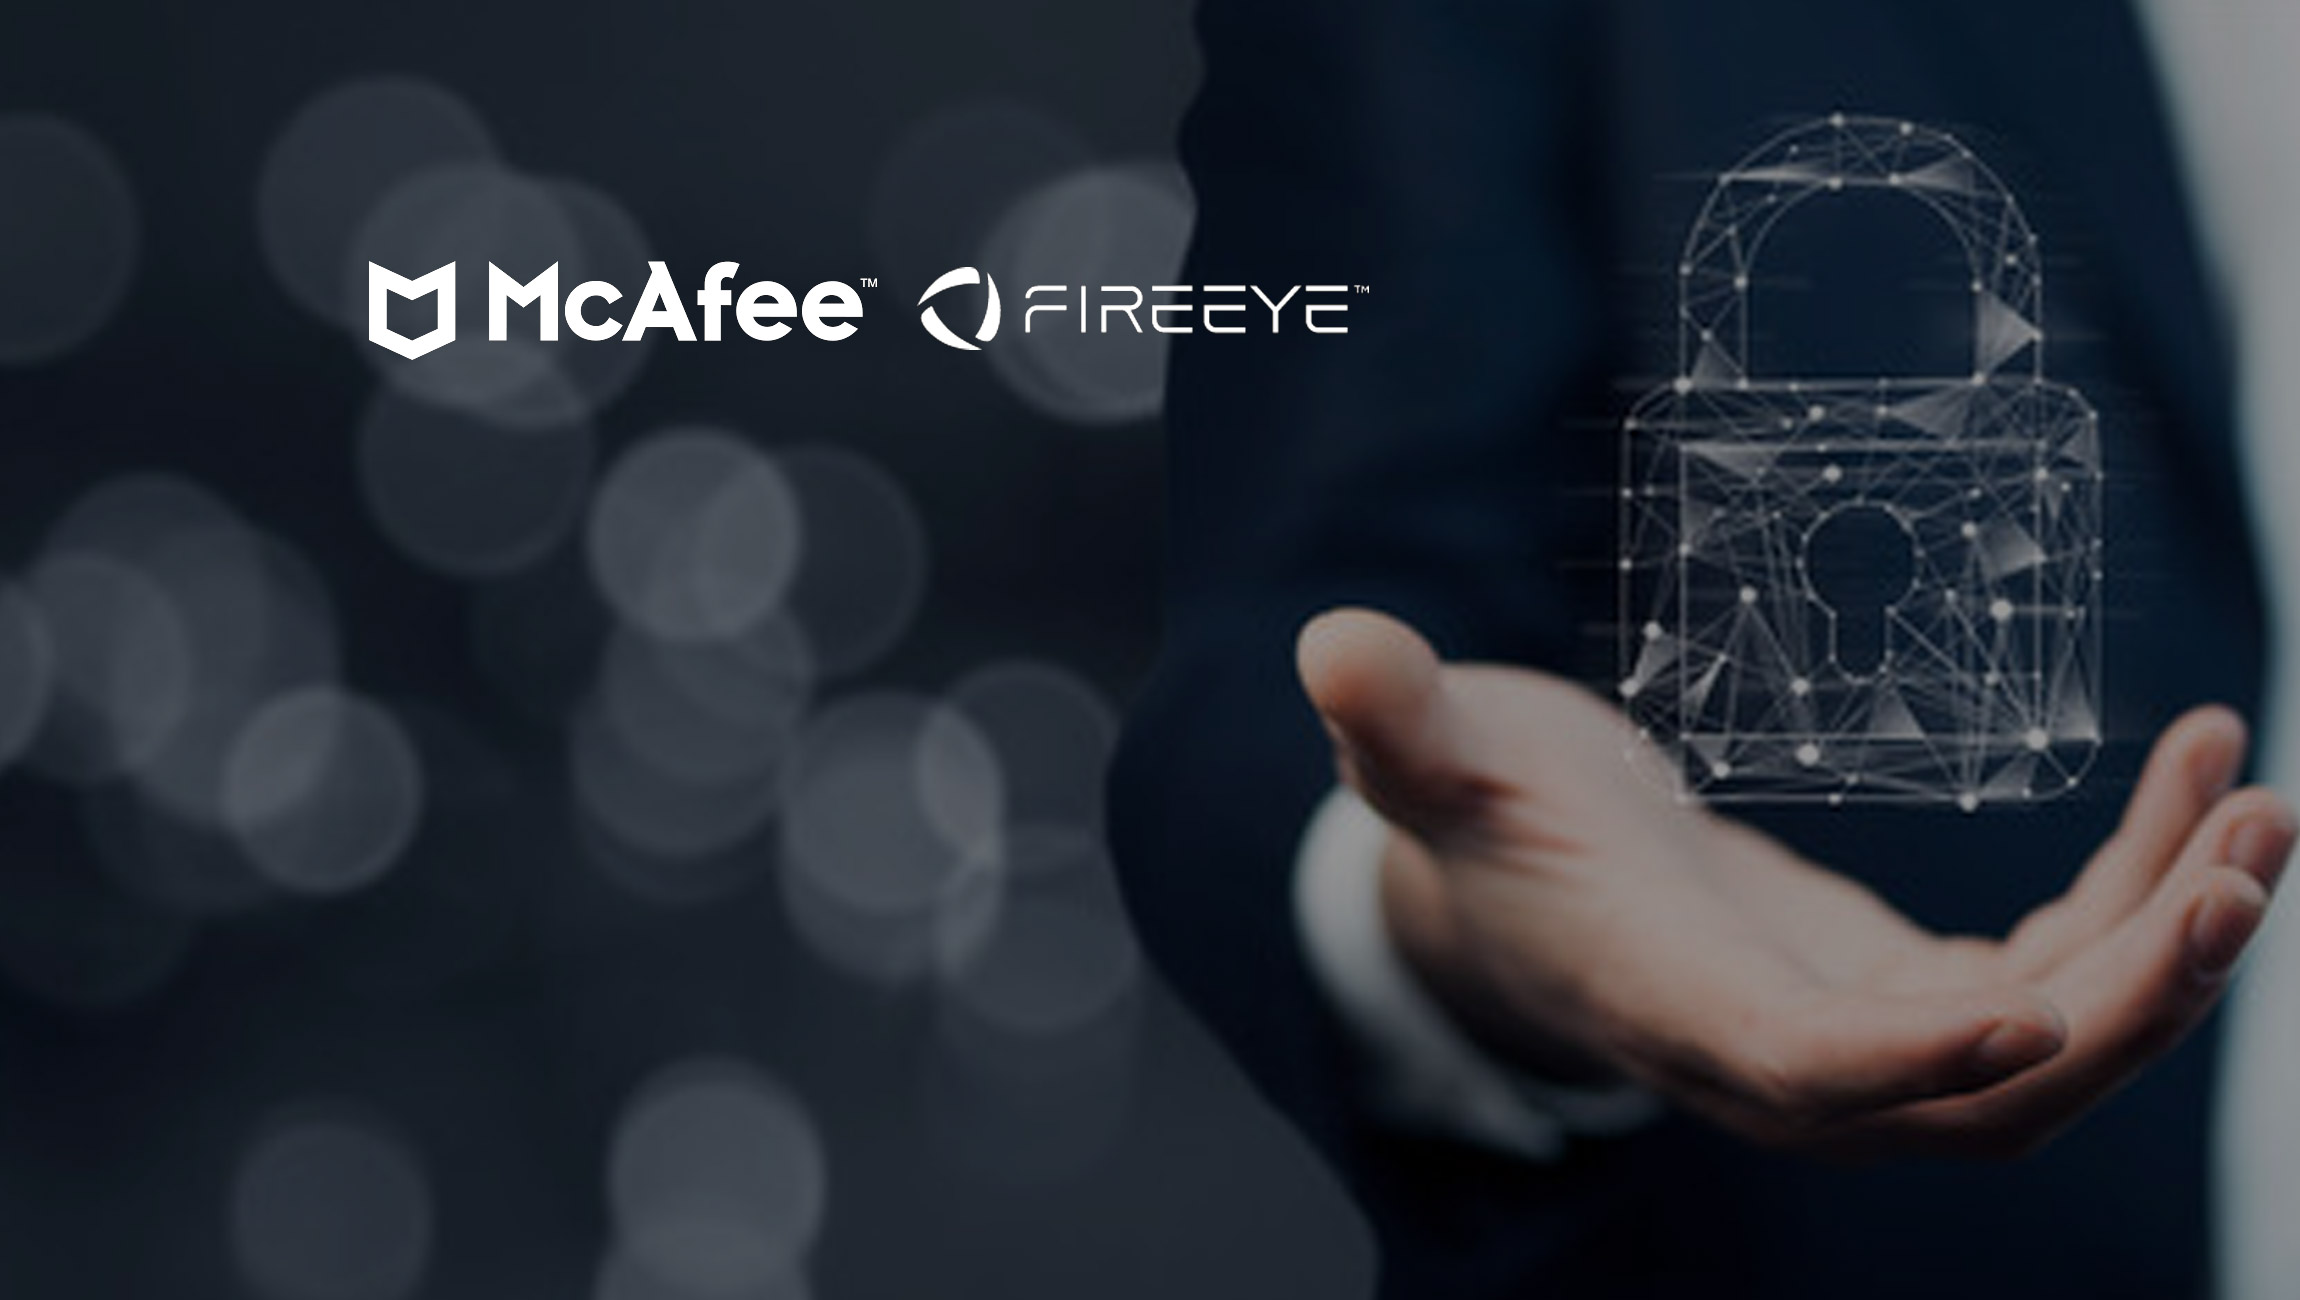 McAfee-Enterprise-Named-a-Worldwide-Leader-in-IDC-MarketScape-for-Cloud-Security-Gateways